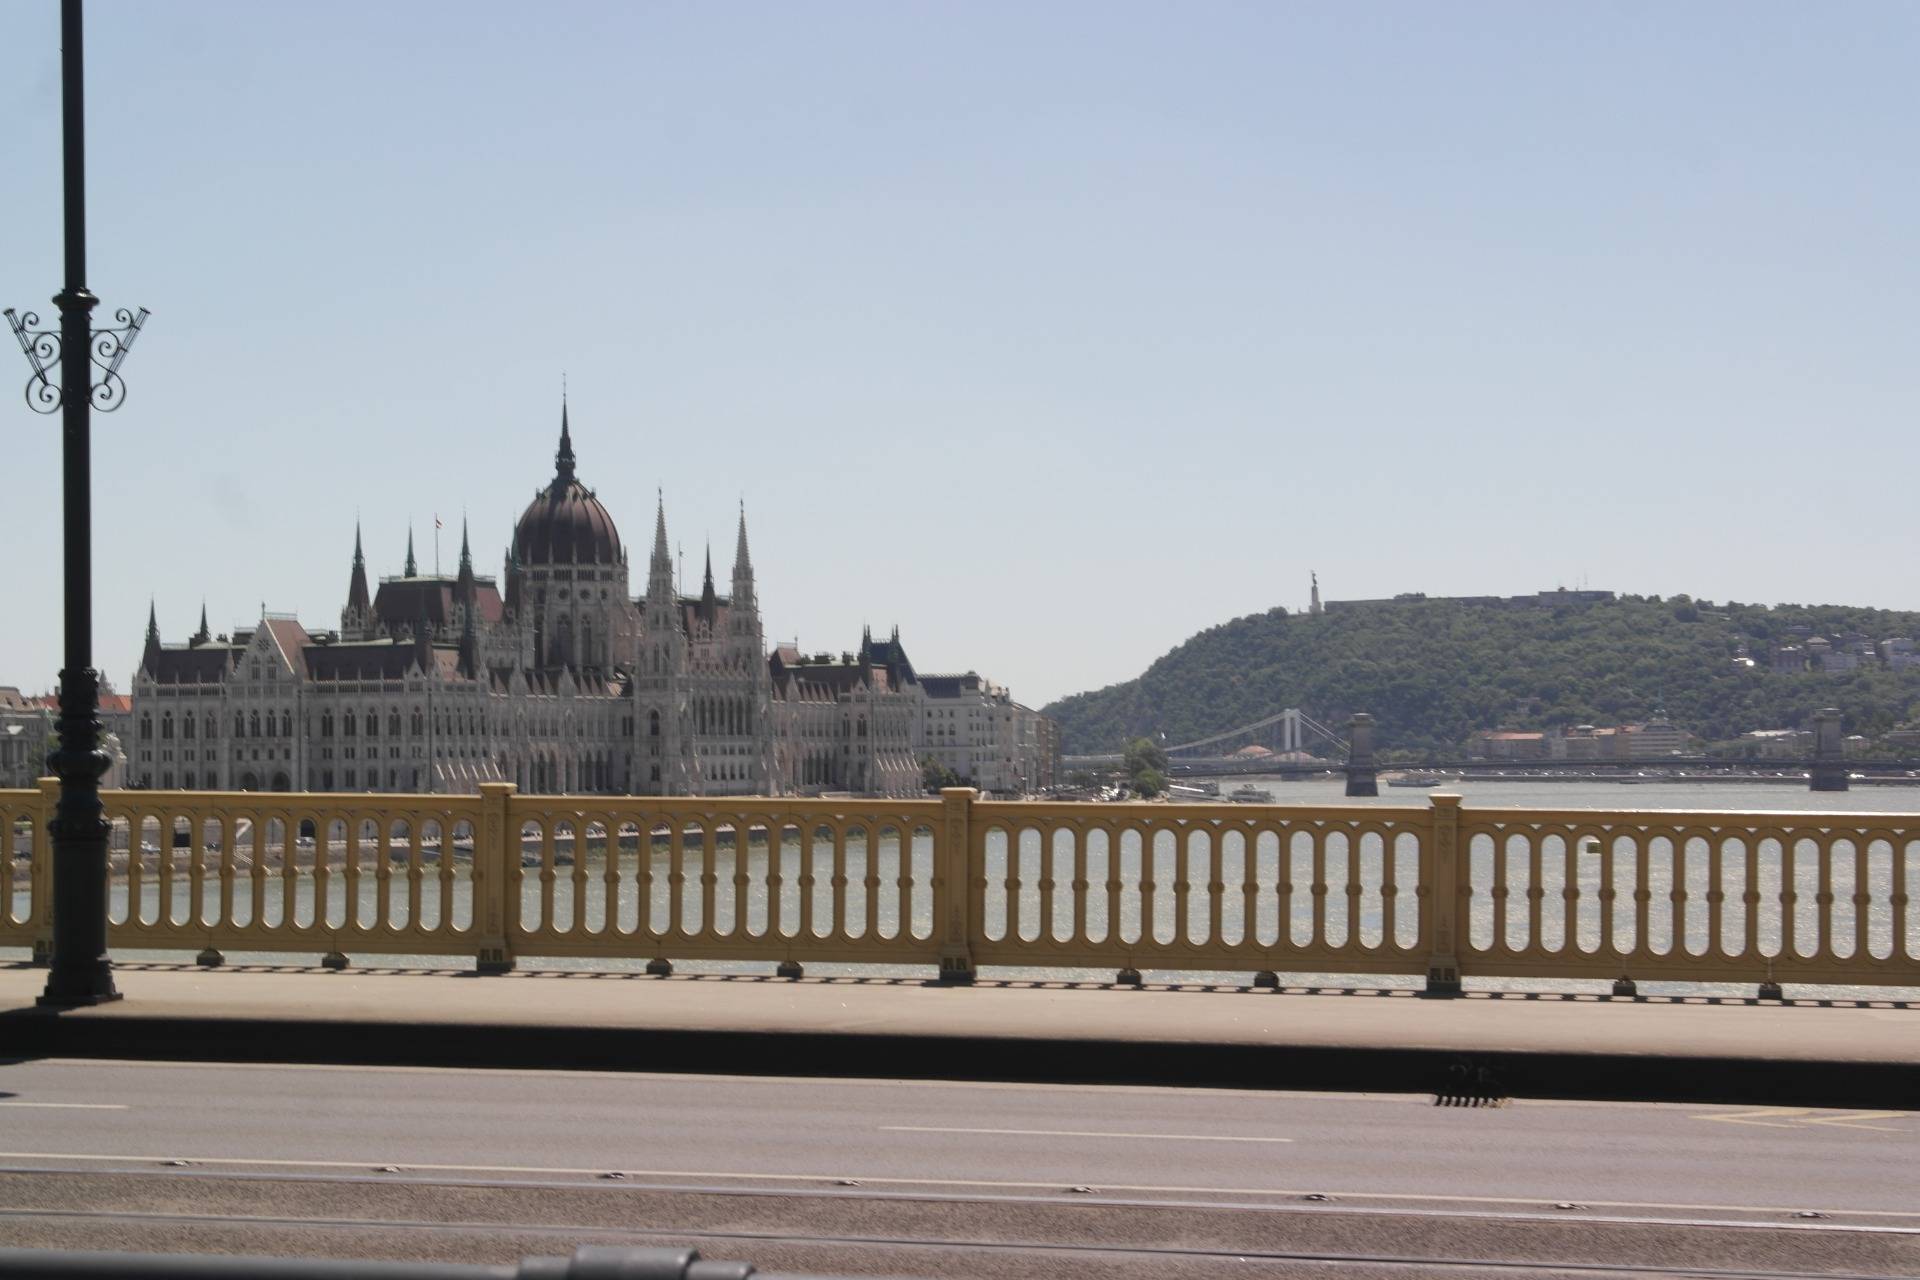 From the bridge that connects the Island with both Buda and Pest.